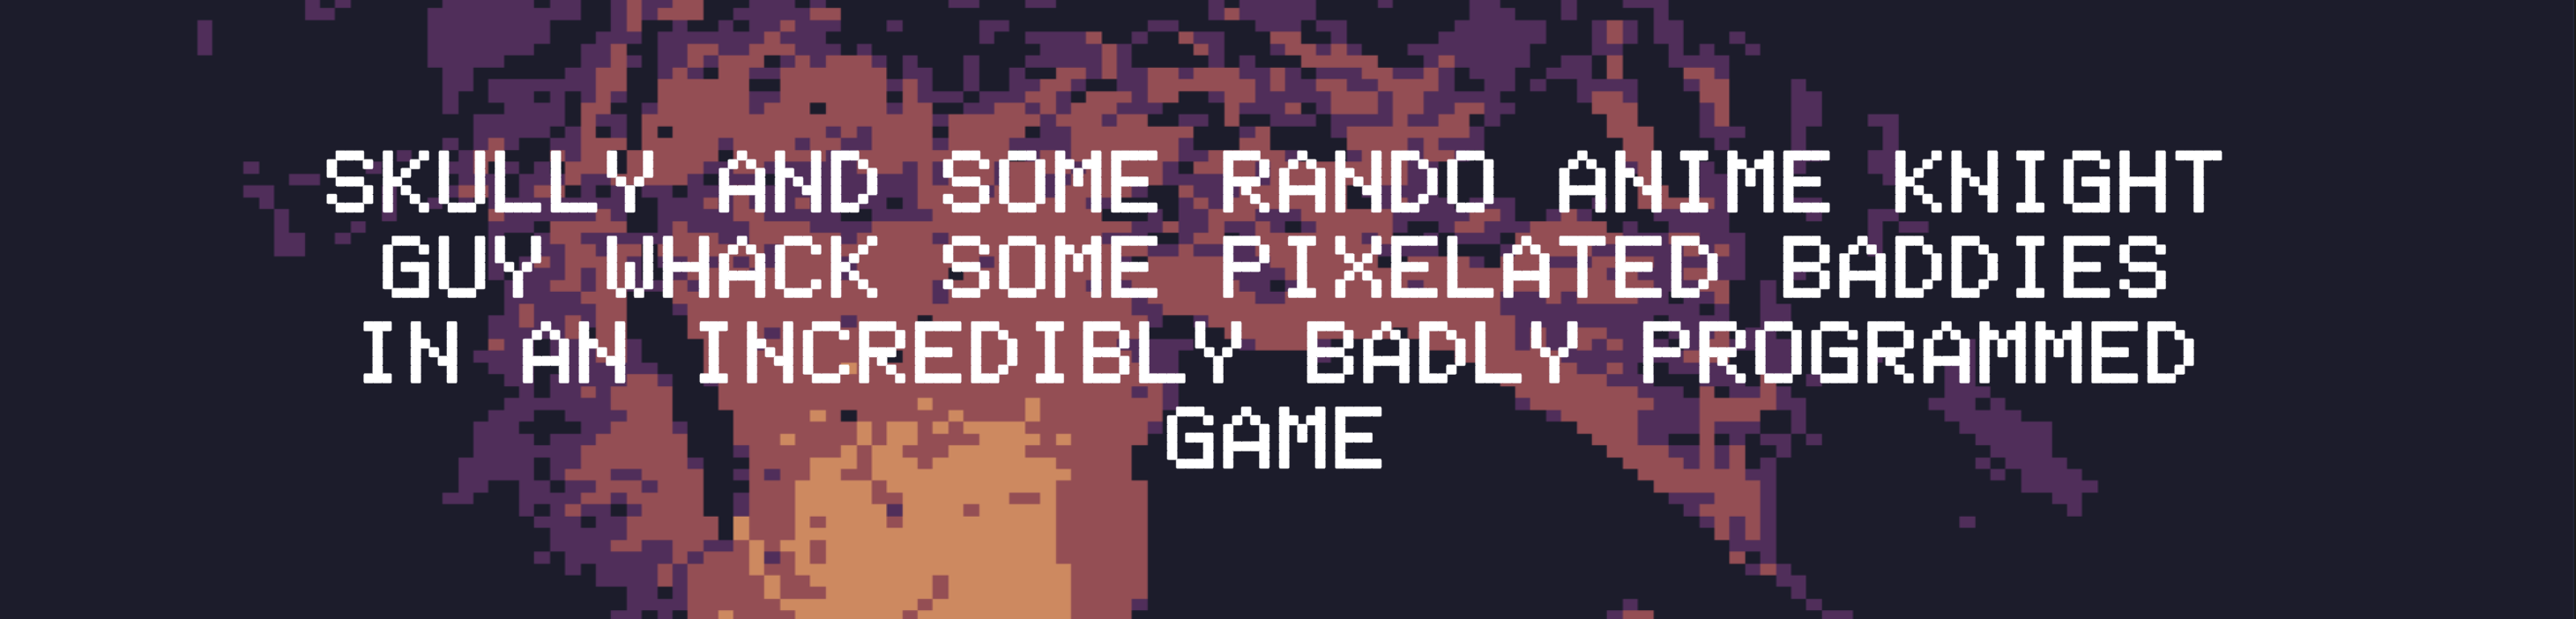 Skully and SOME RANDO anime KNIGHT guy whack some PIXELATED baddies IN AN INCREDIBLY BADLY PROGRAMMED GAME